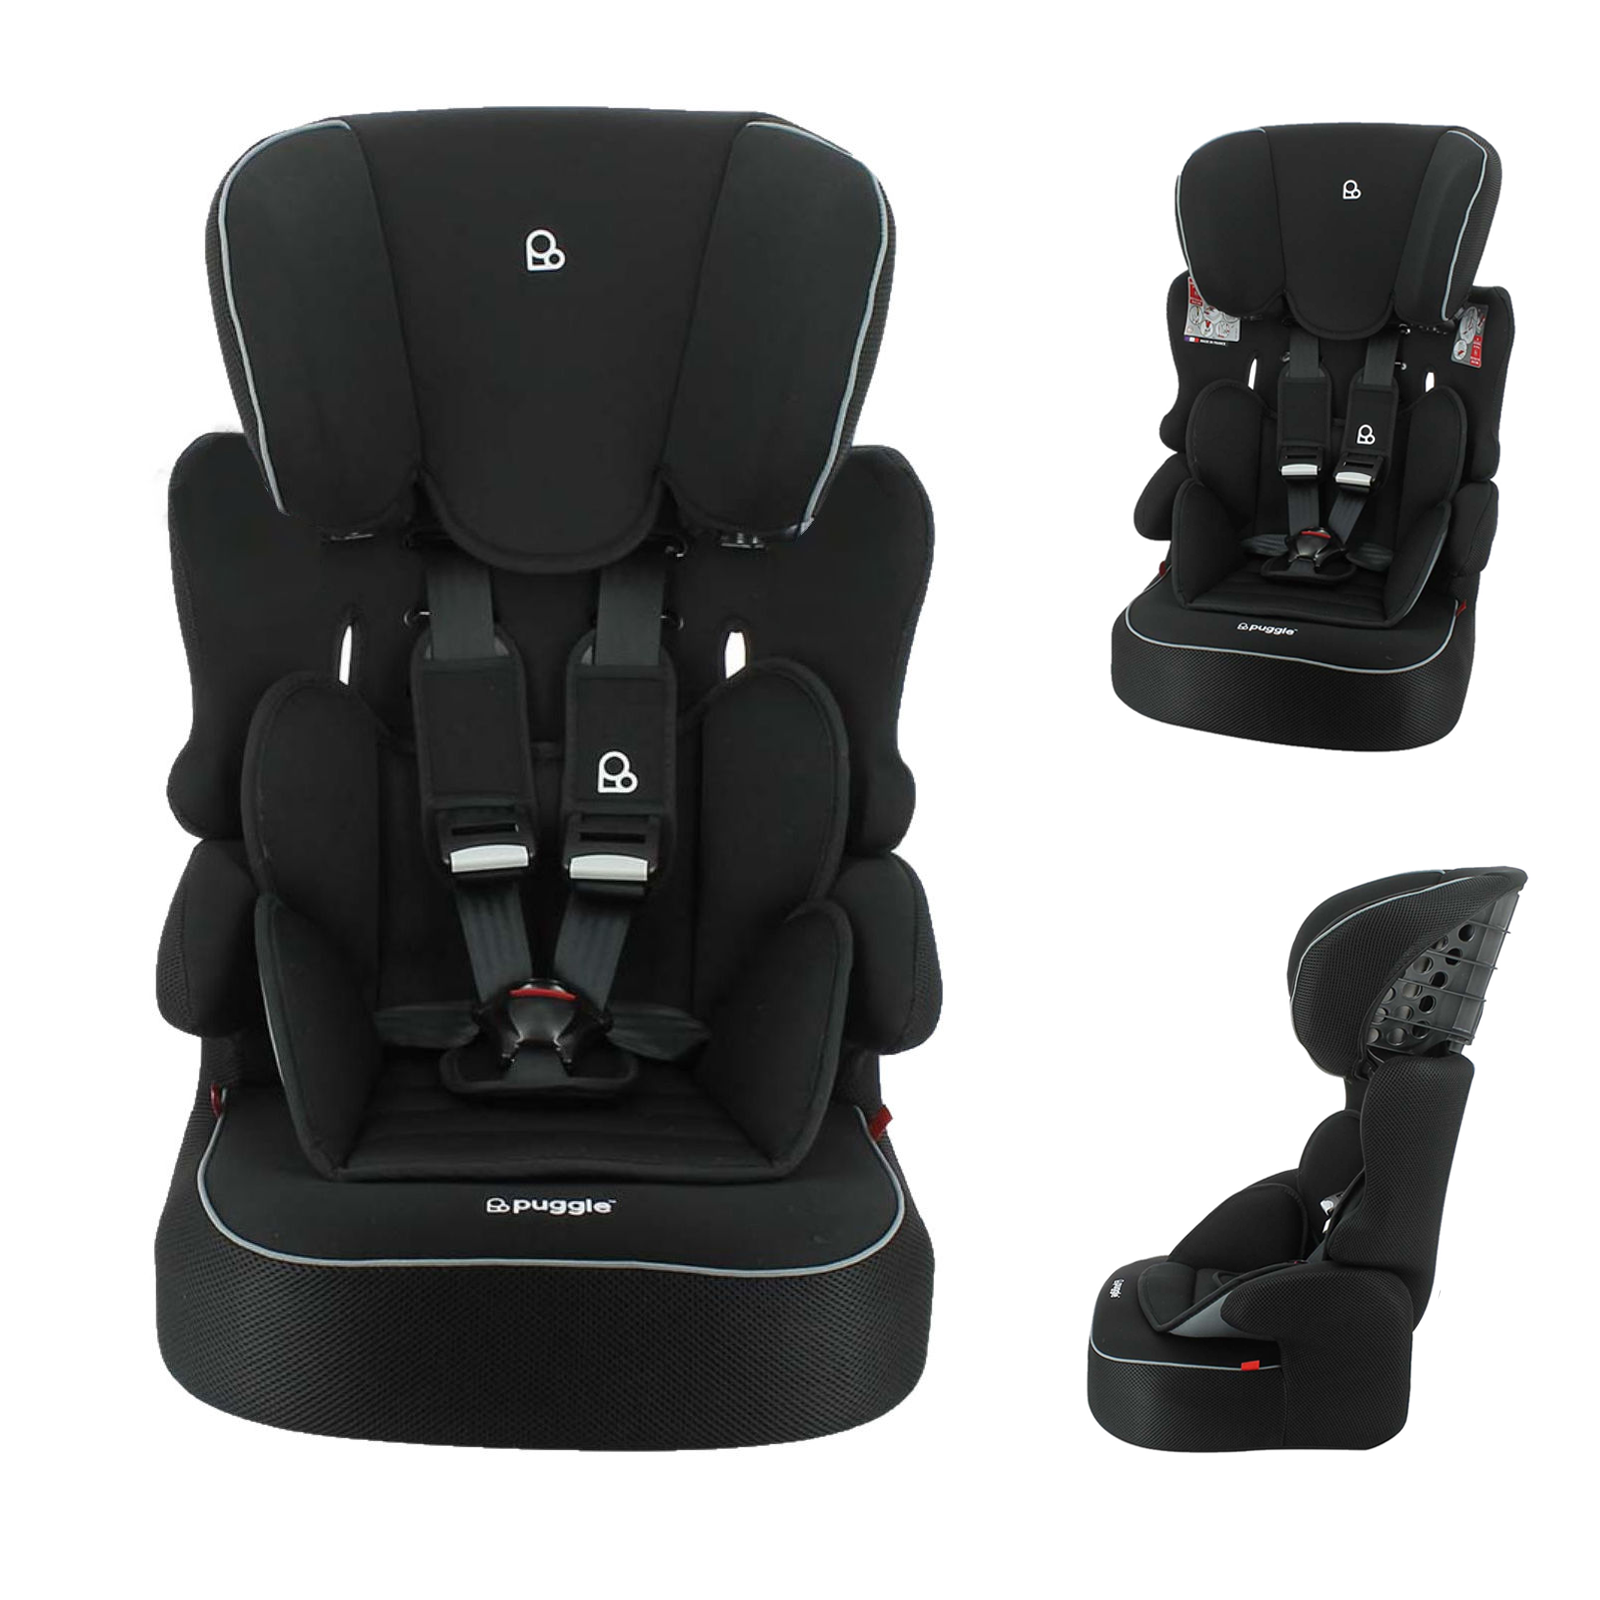 Puggle Linton Comfort Plus Luxe Group 1/2/3 Car Seat - Storm Black (9 Months-12 Years)